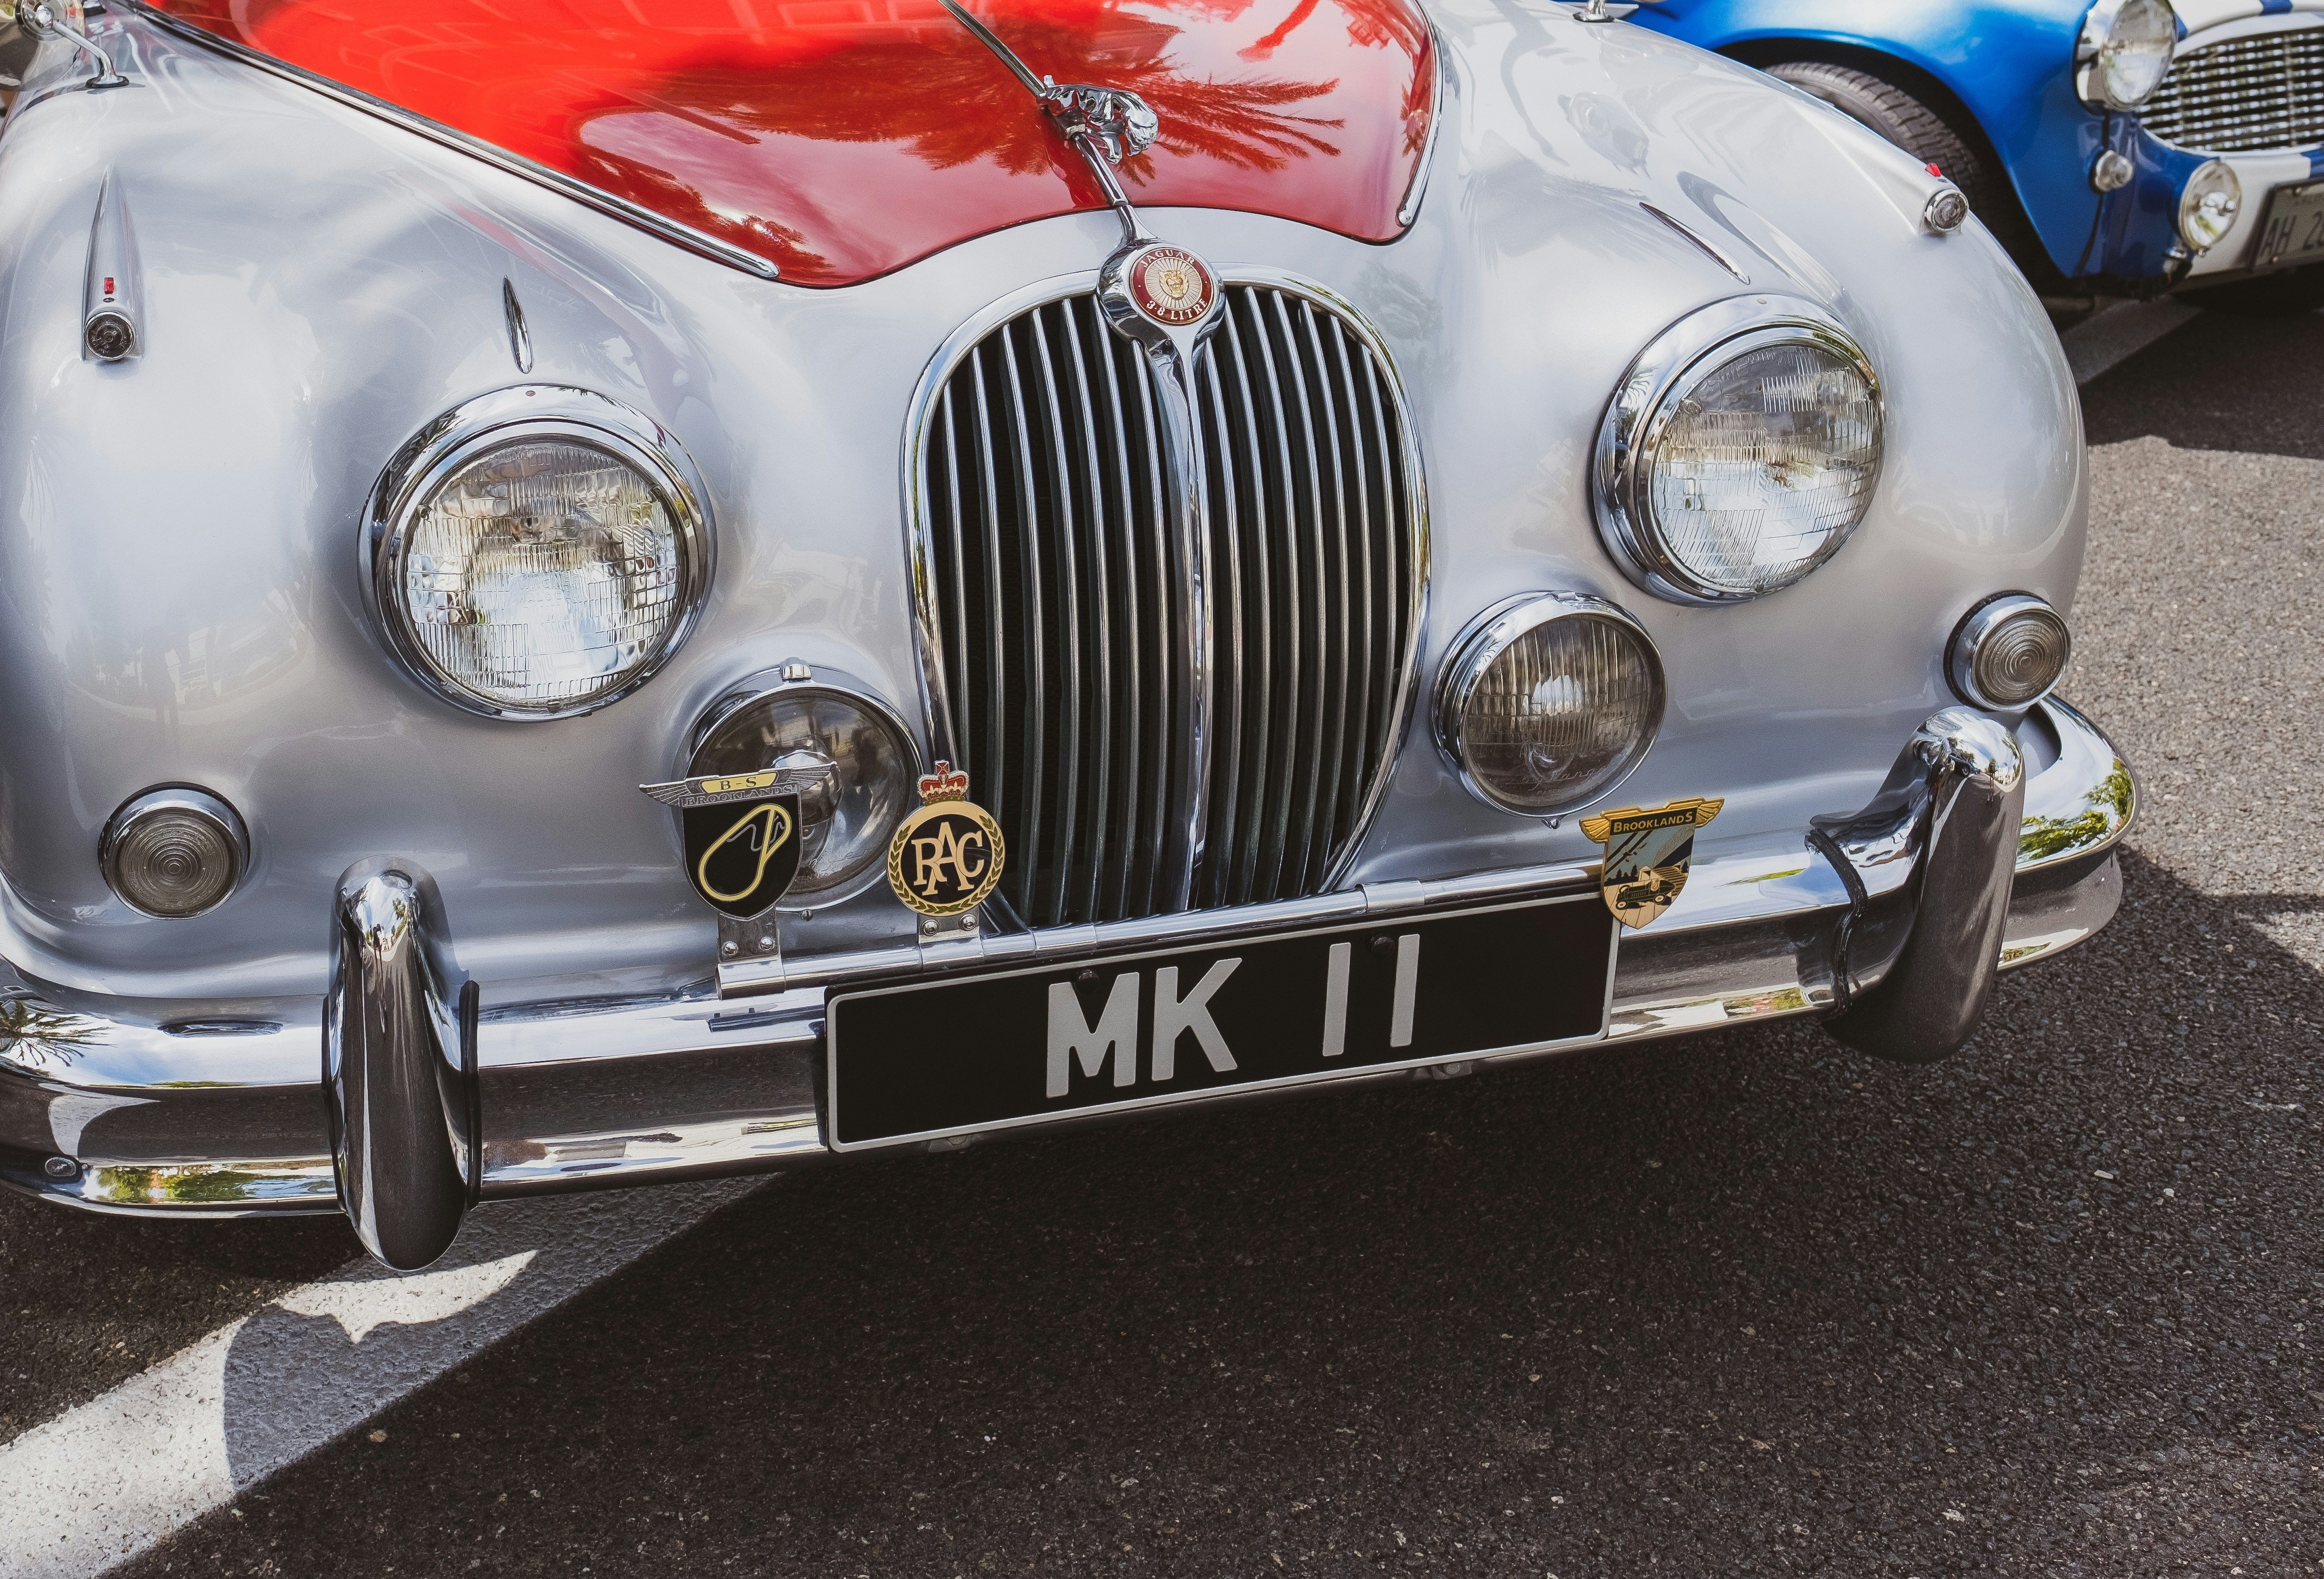 white and red Jaguar Mark 1 vehicle